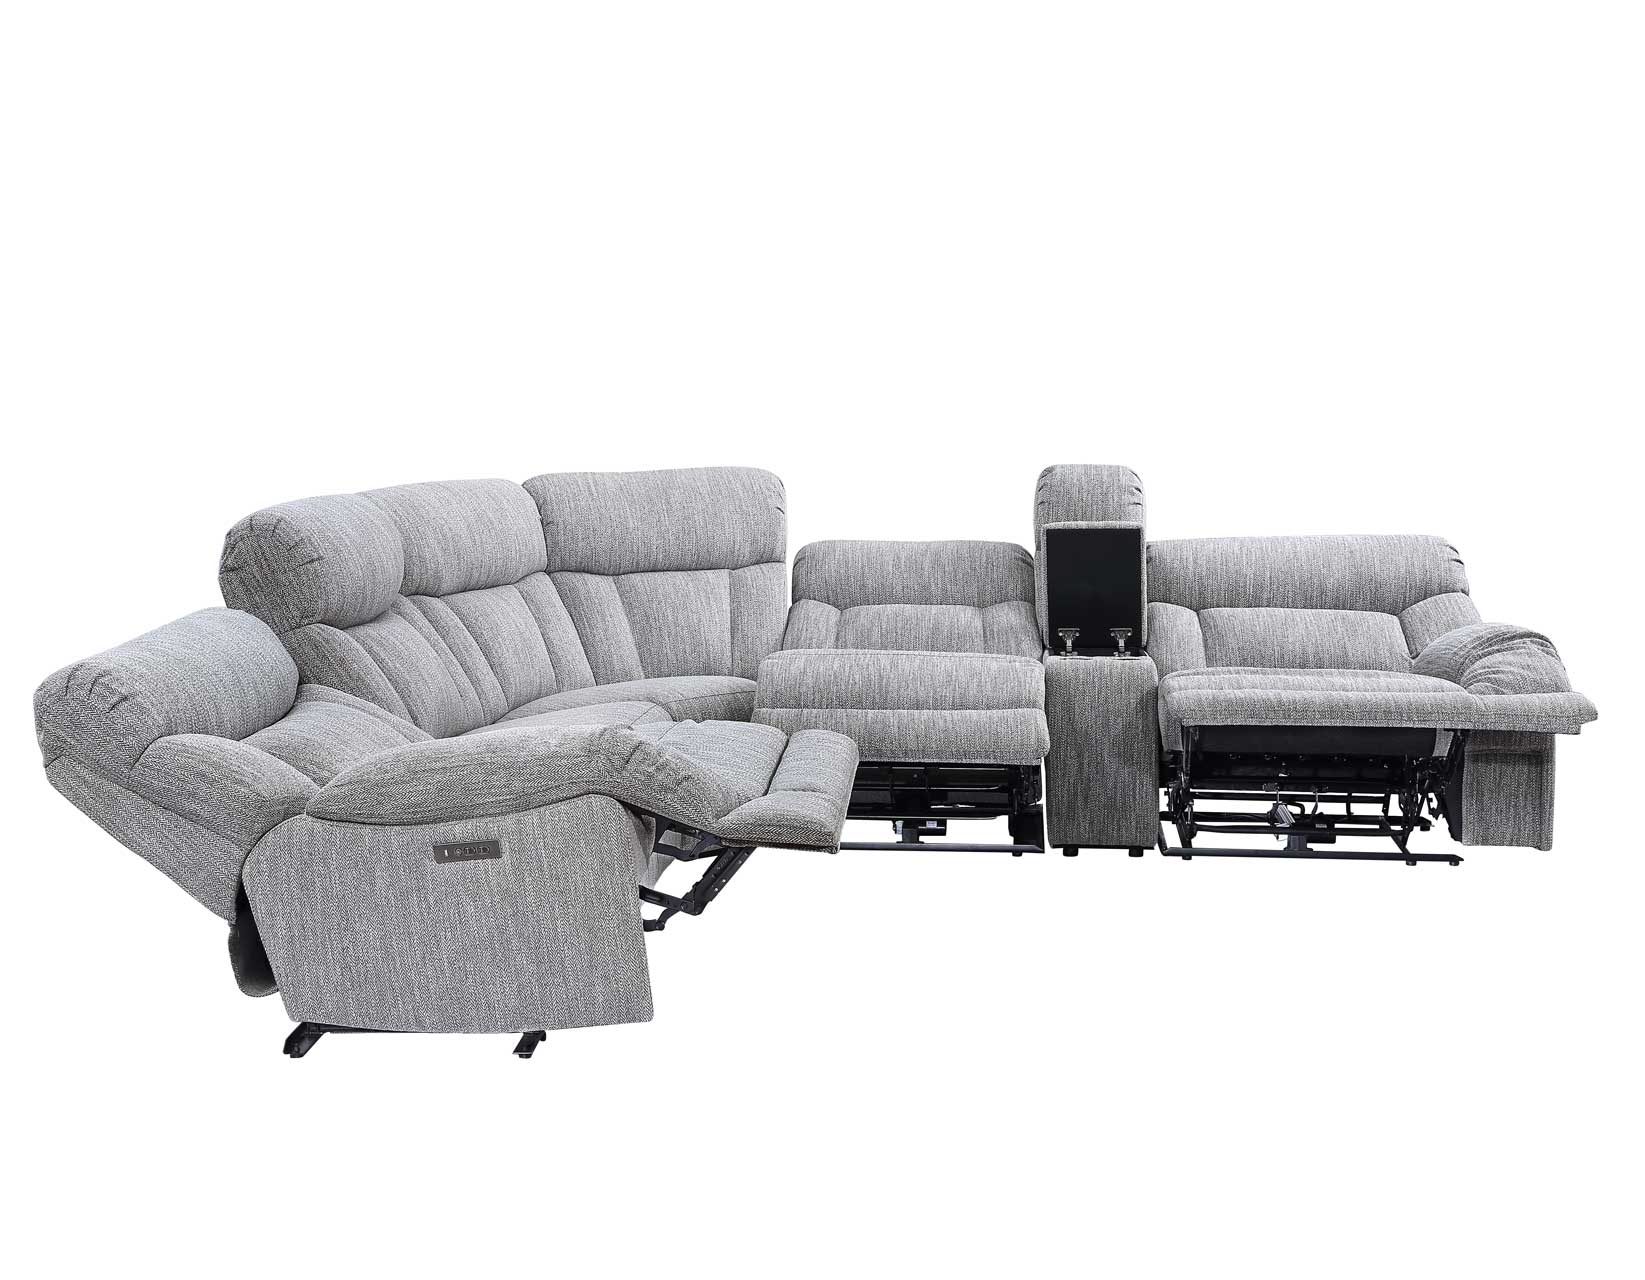 Park City 6-Piece Dual-Power Sectional by Steve Silver